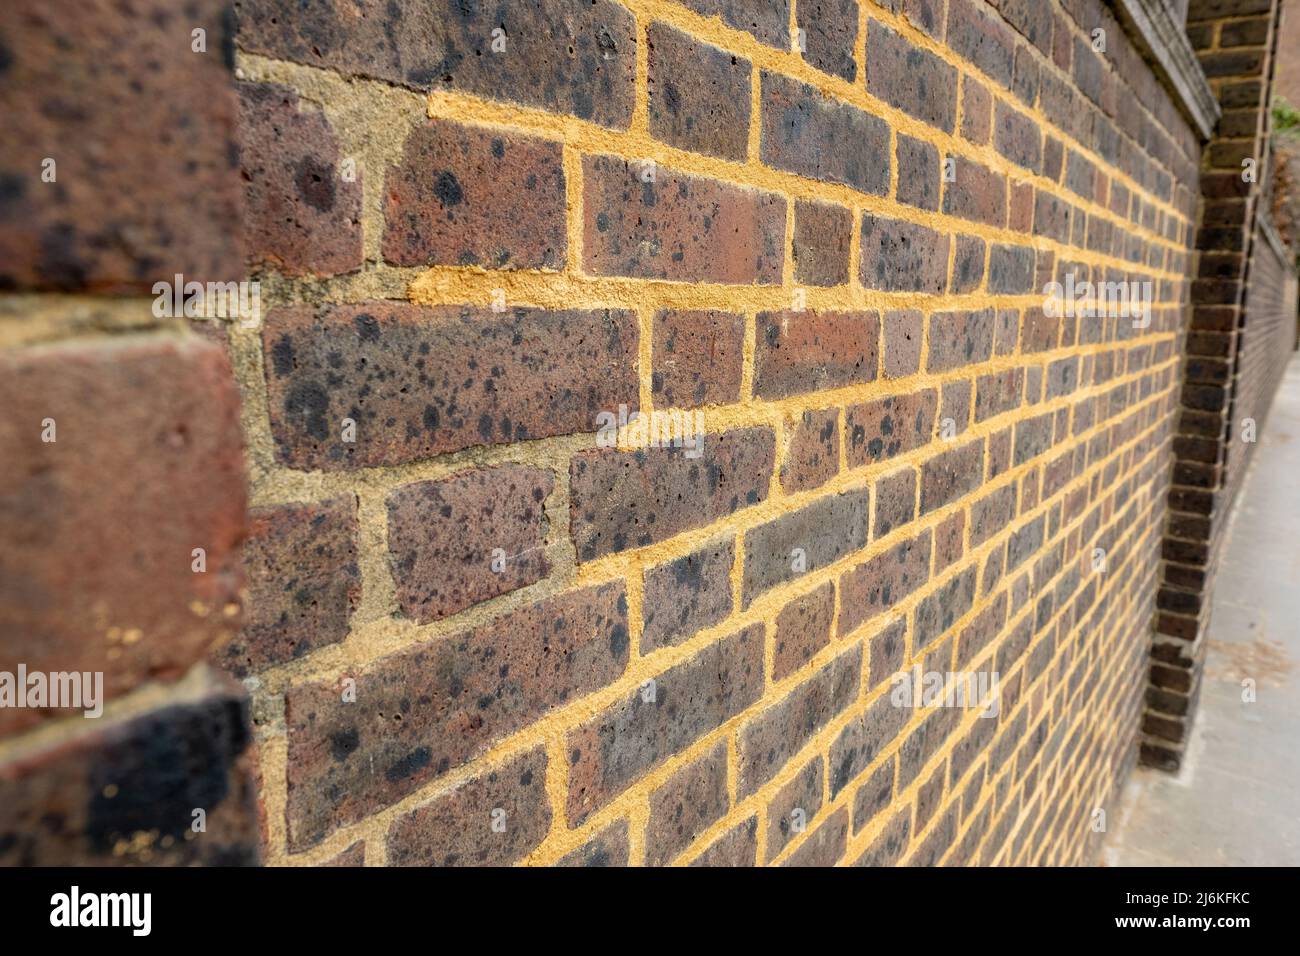 Repointing work on an old brick wall with mortar mix Stock Photo